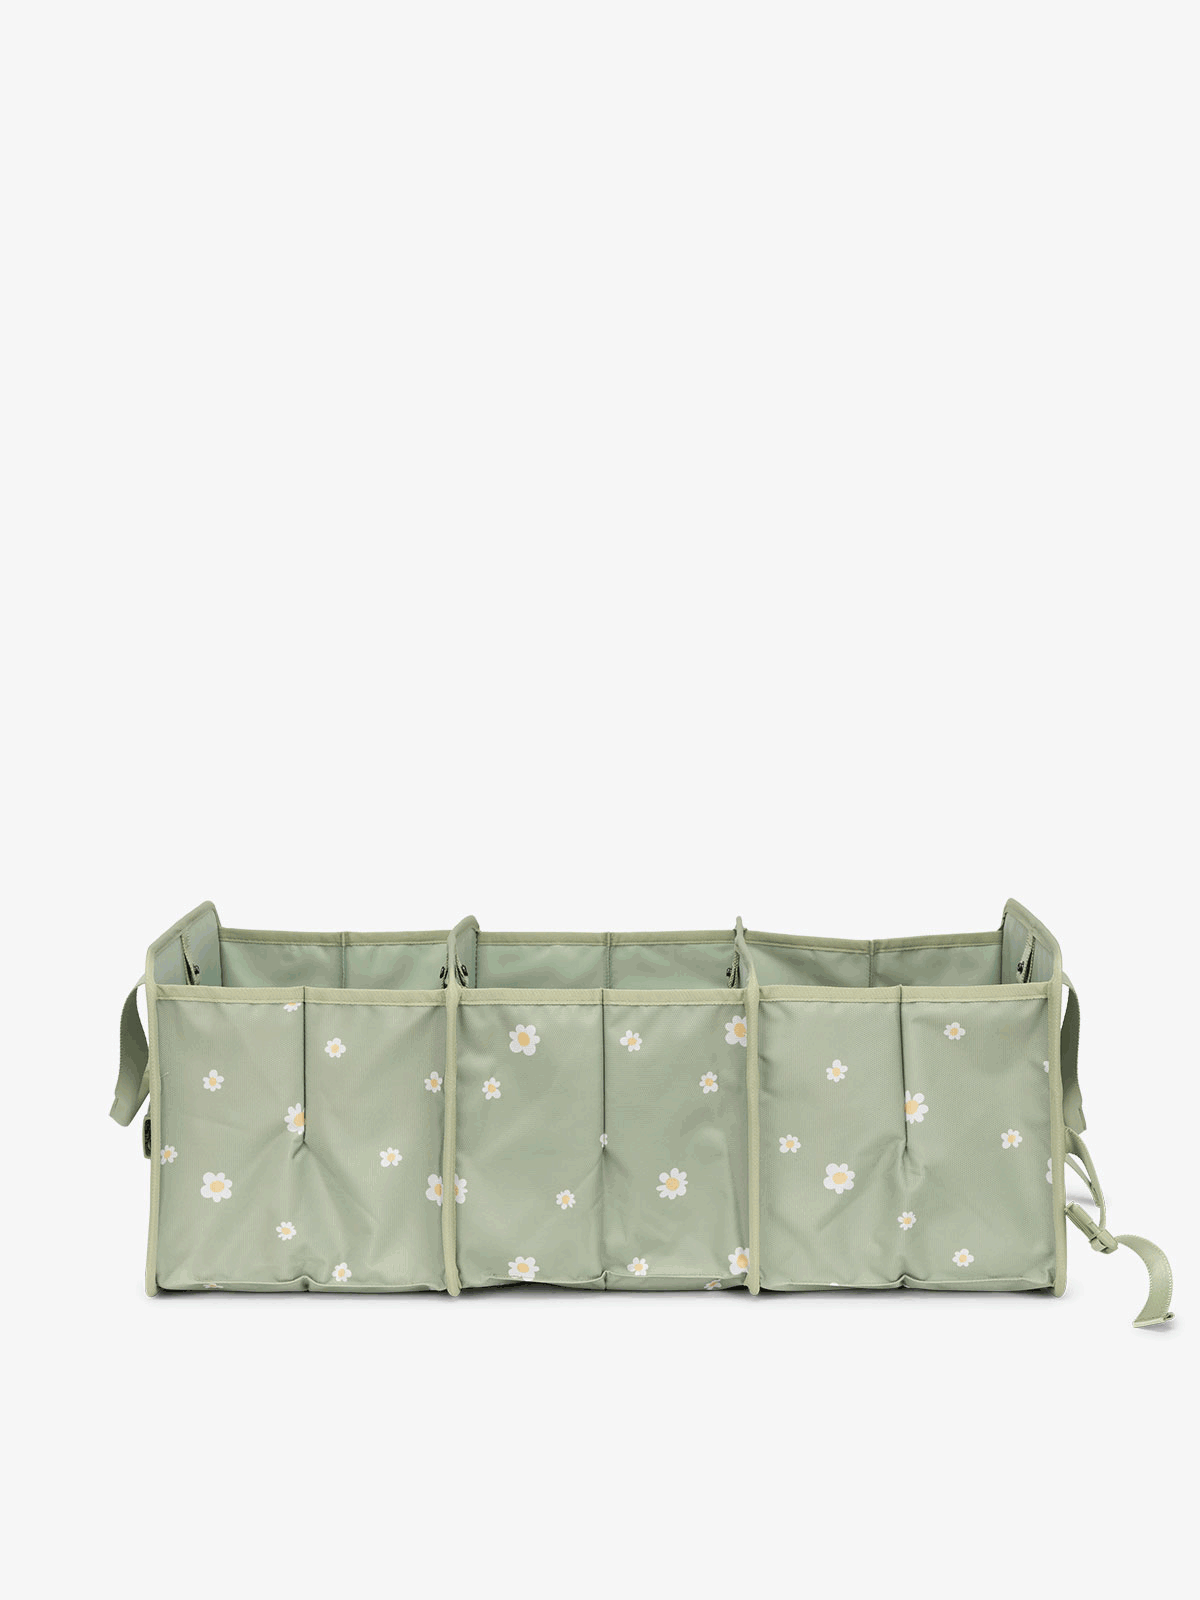 CALPAK car organizer for trunk with 3 compartments in daisy green